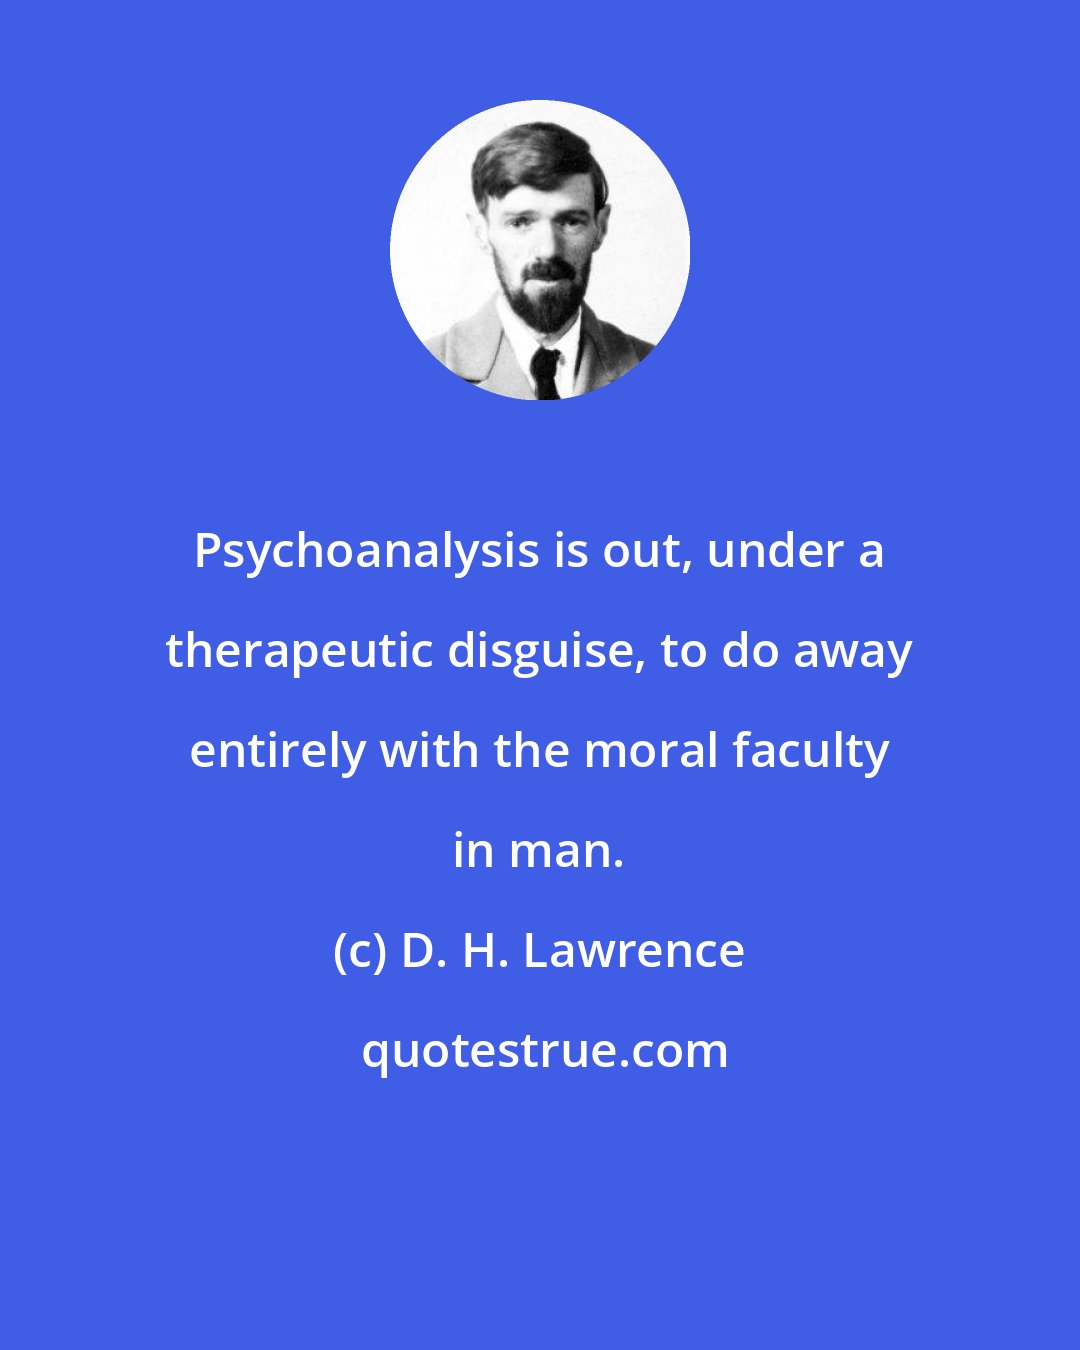 D. H. Lawrence: Psychoanalysis is out, under a therapeutic disguise, to do away entirely with the moral faculty in man.